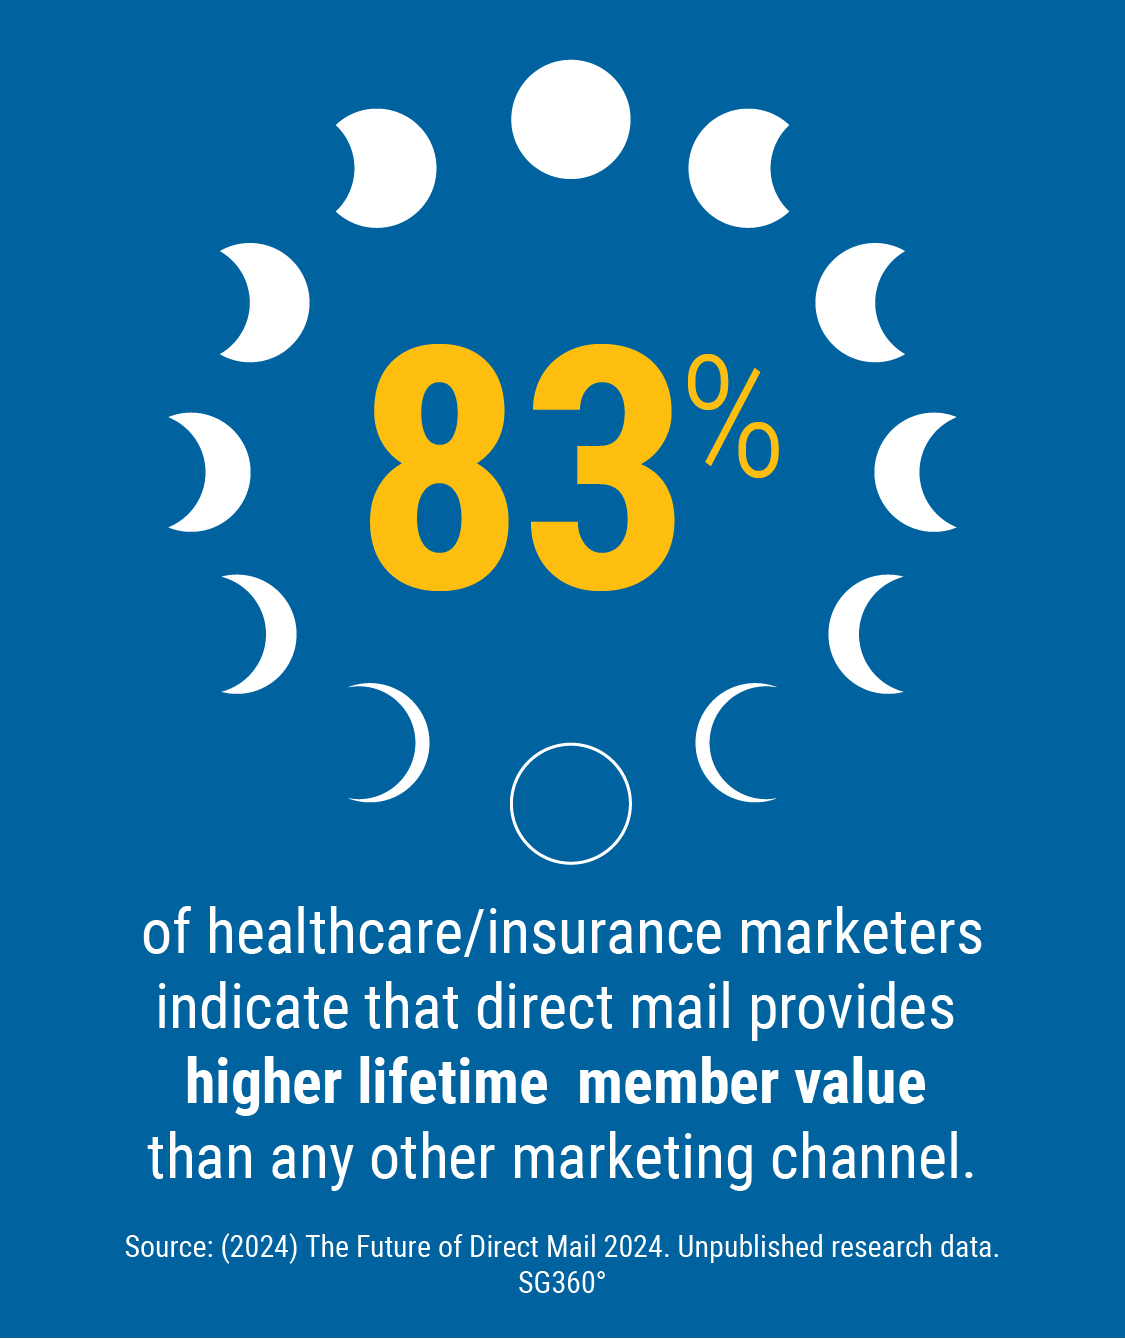 Direct mail drives higher lifetime value than any other channel for health insurance